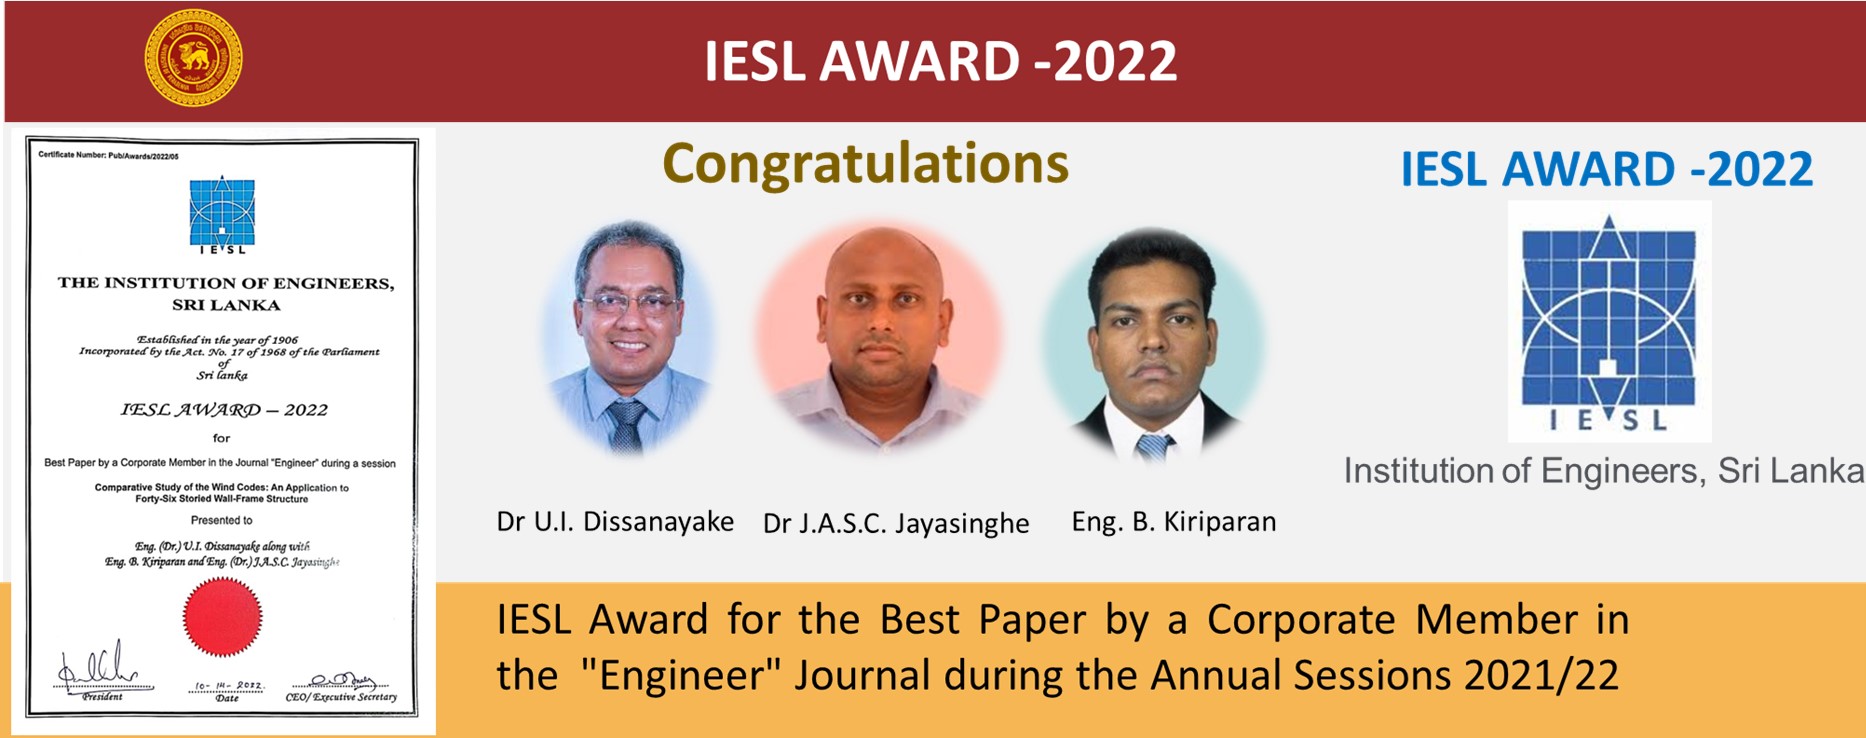 IESL AWARD - 2022 for Best Paper - in the Journal Engineer during the session 2021/22